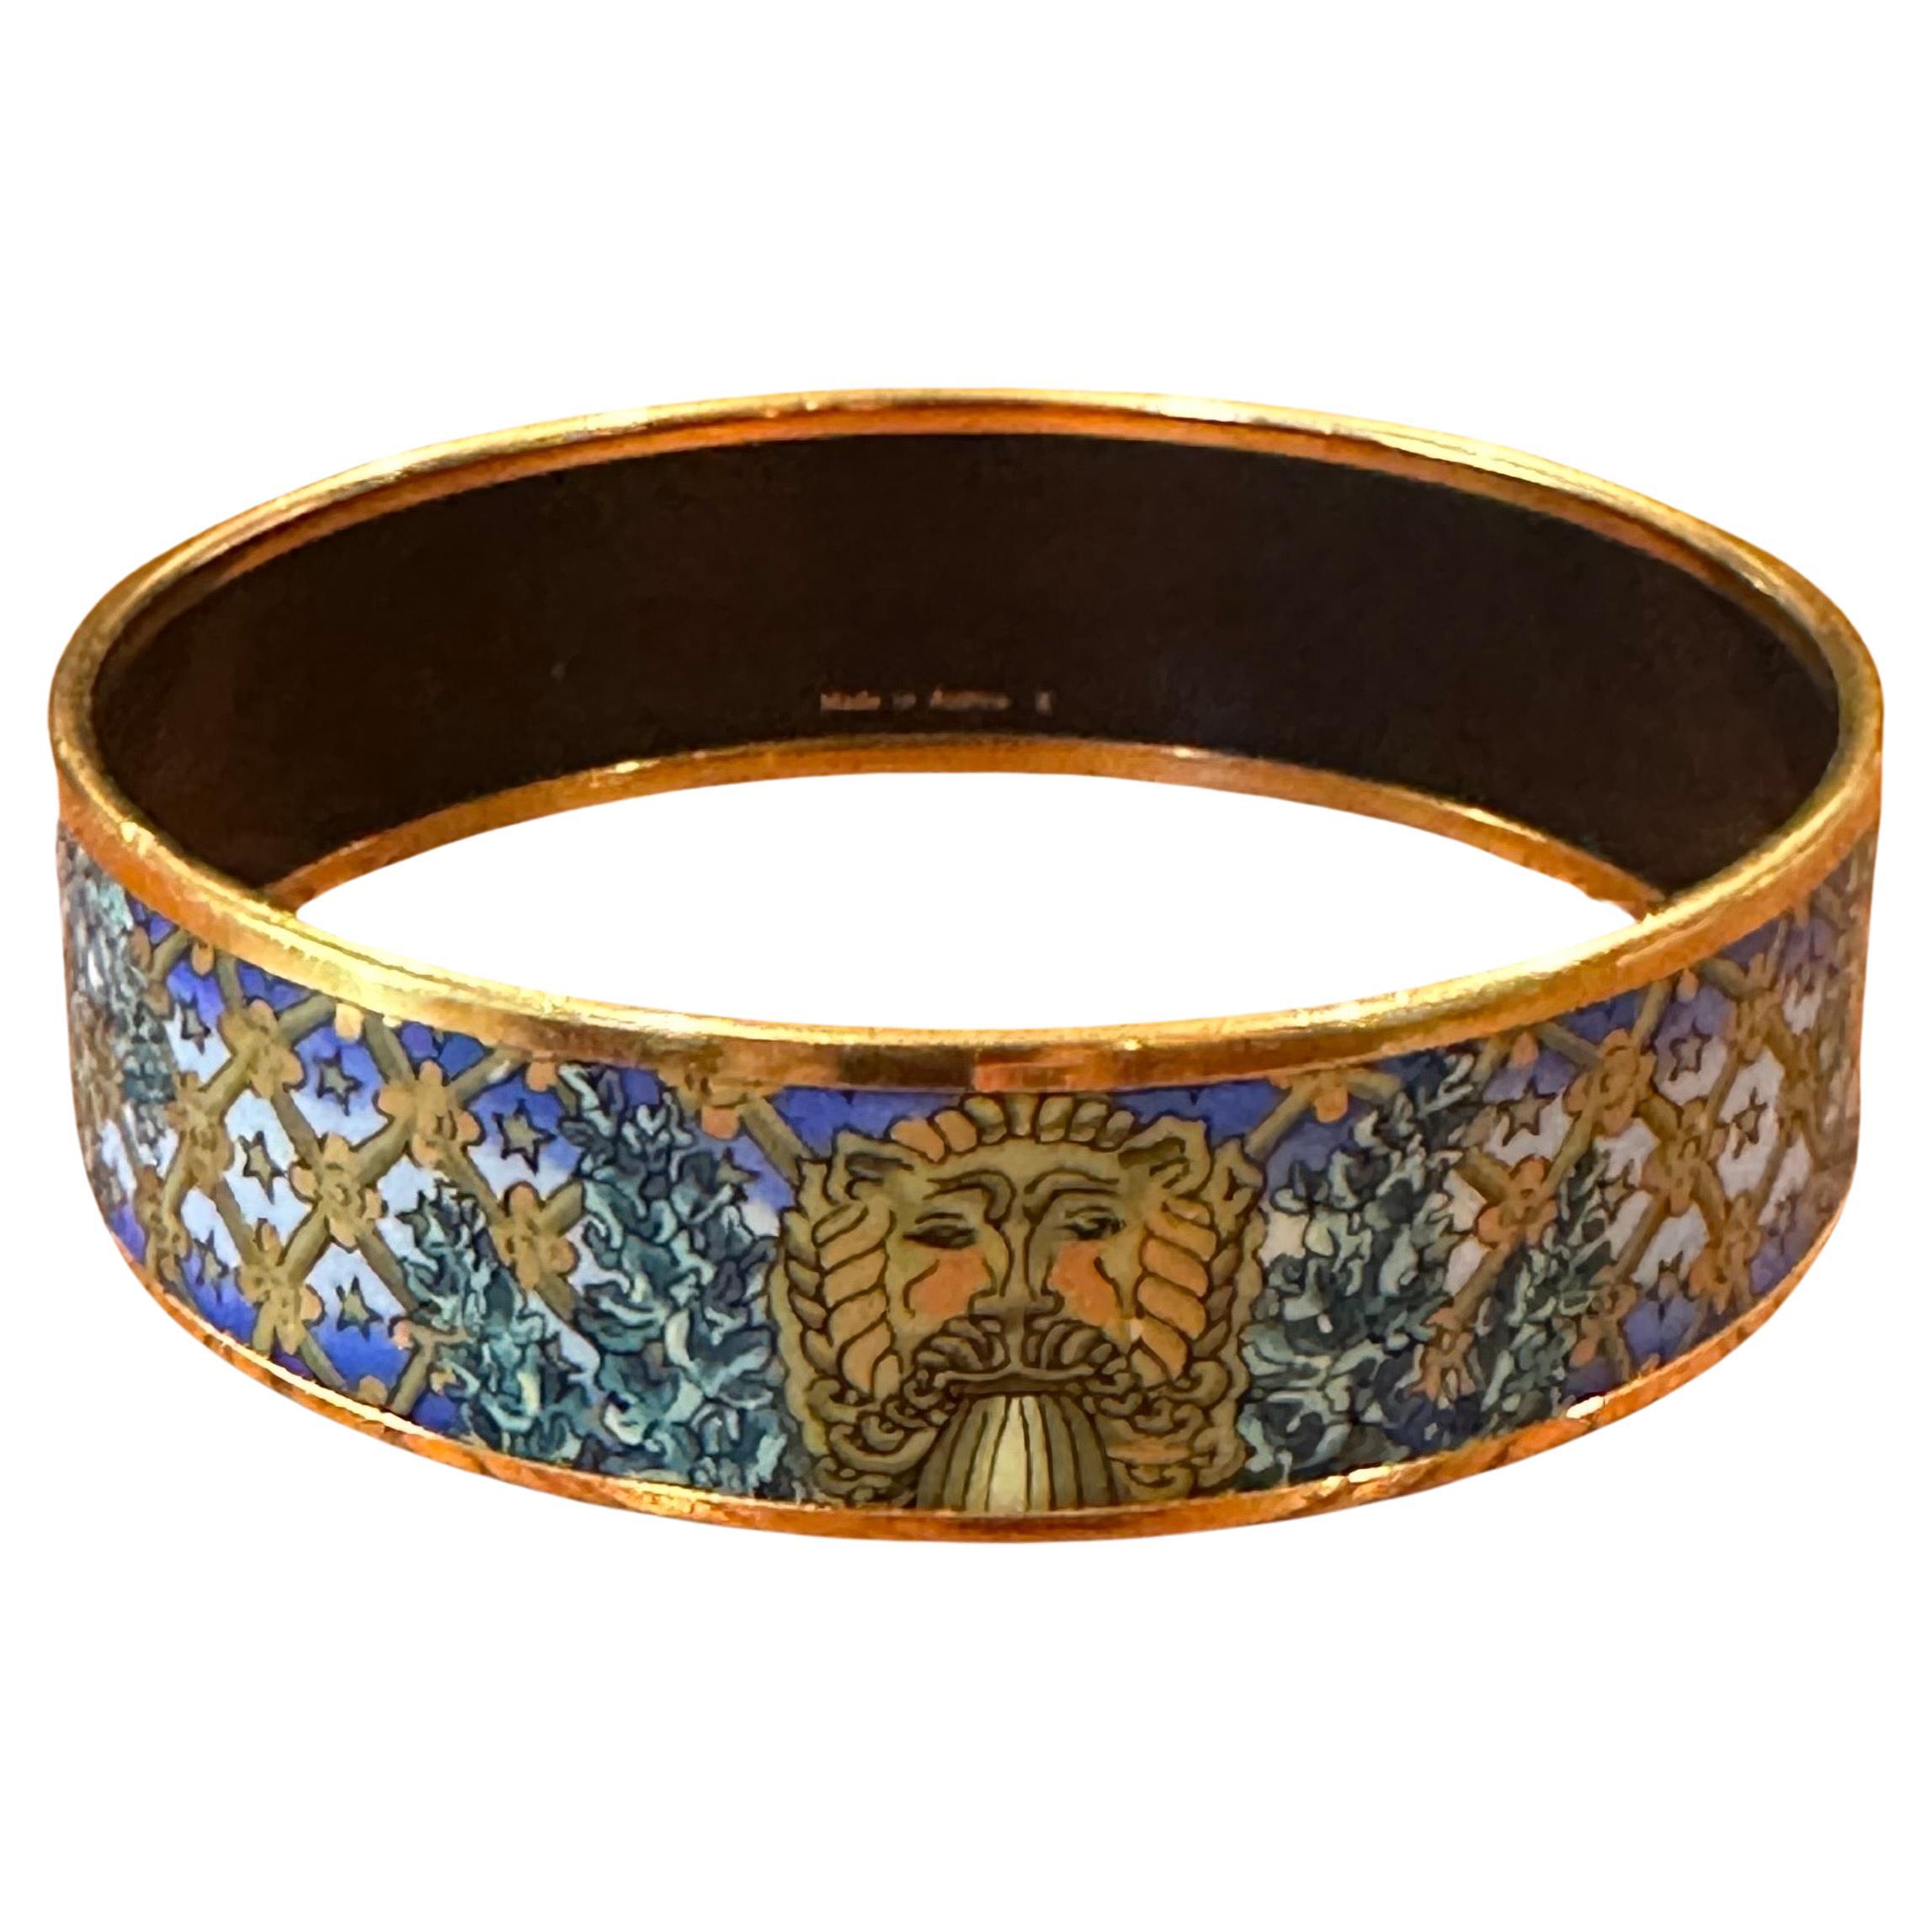 Vintage enameled and gold plated lion head bangle bracelet with original box and ribbon by Hermès, circa 1990s.  The bracelet is in very good vintage condition and measures 2.75